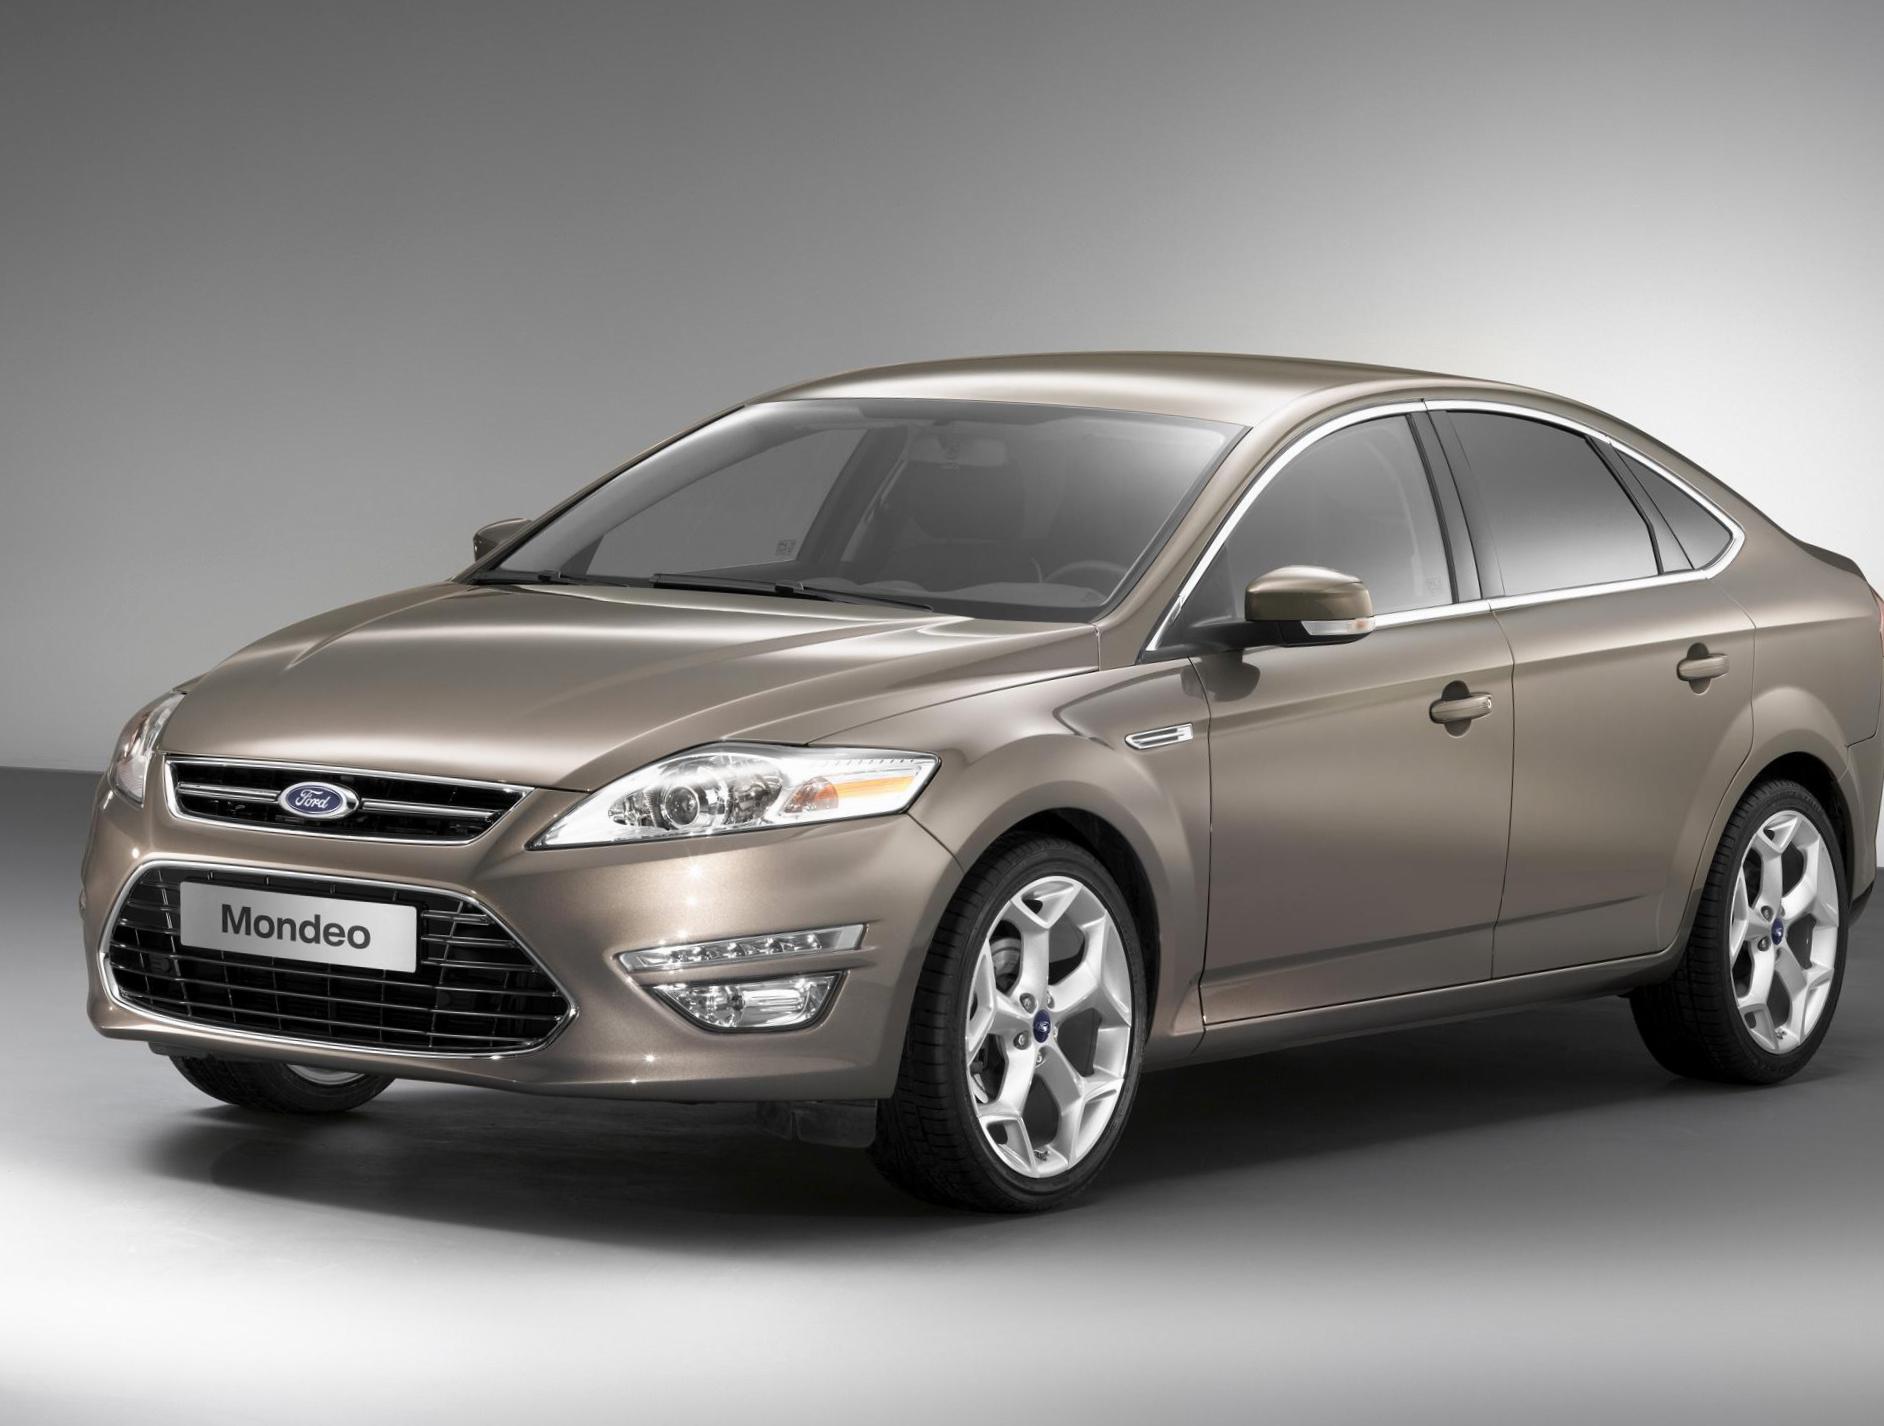 Mondeo Hatchback Ford new 2010